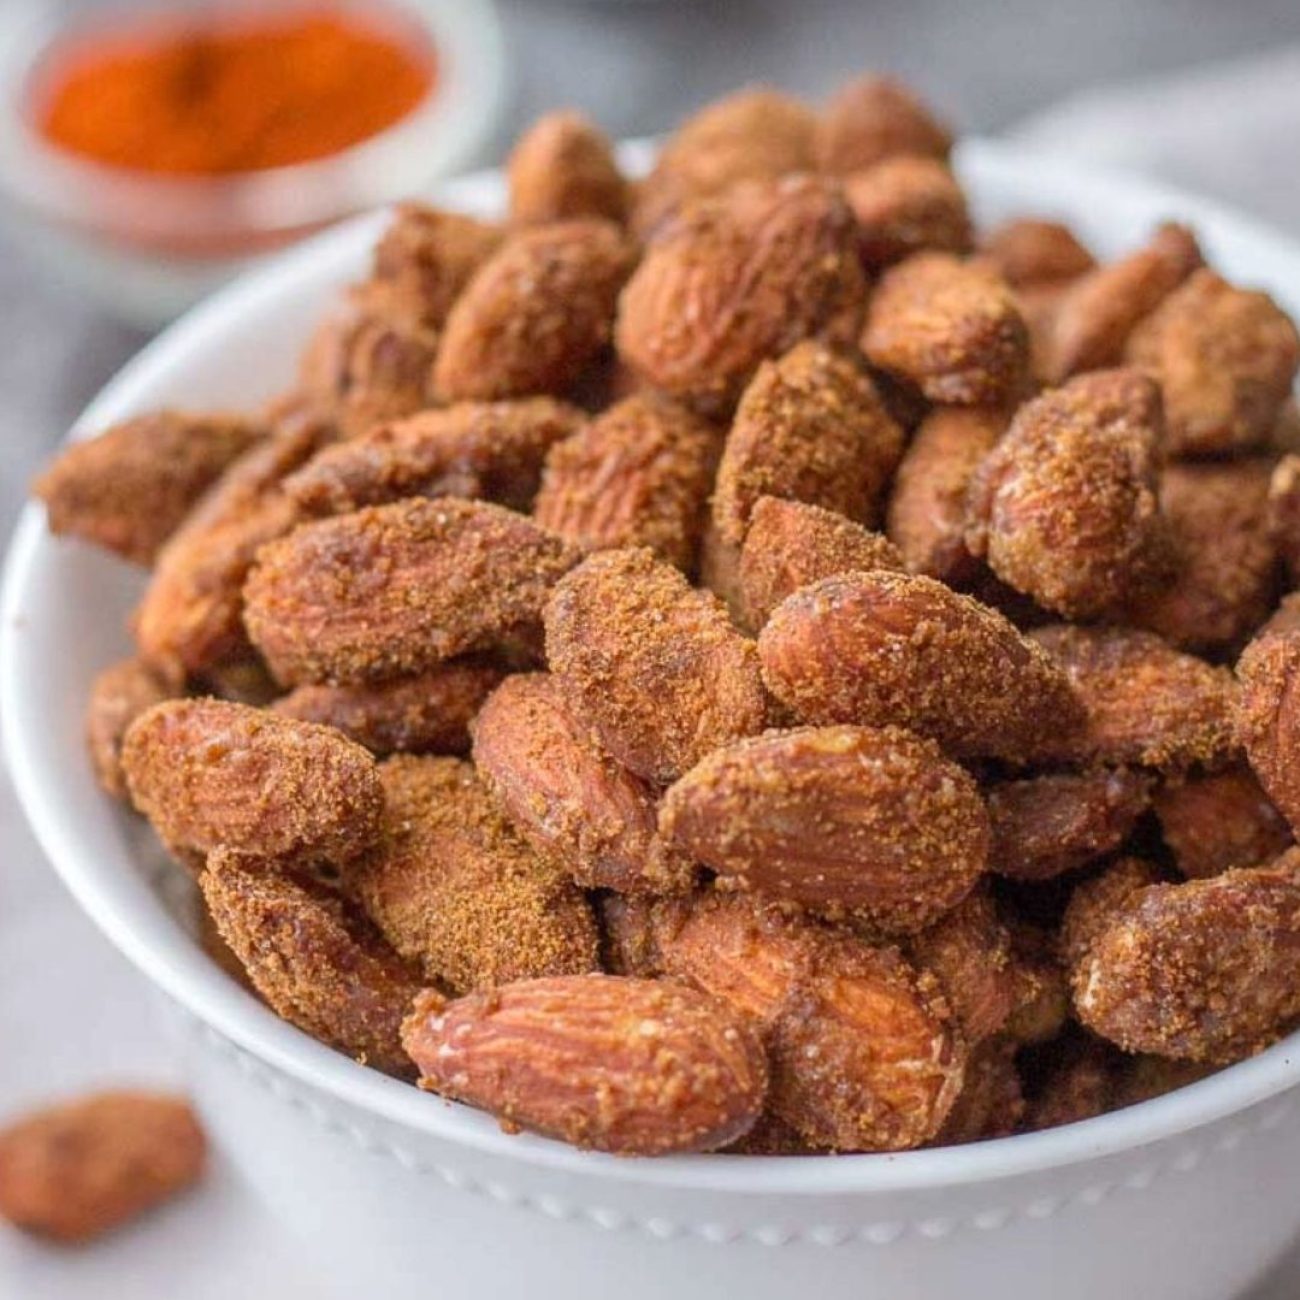 Healthy Cinnamon-Spiced Almonds Without Added Sugar